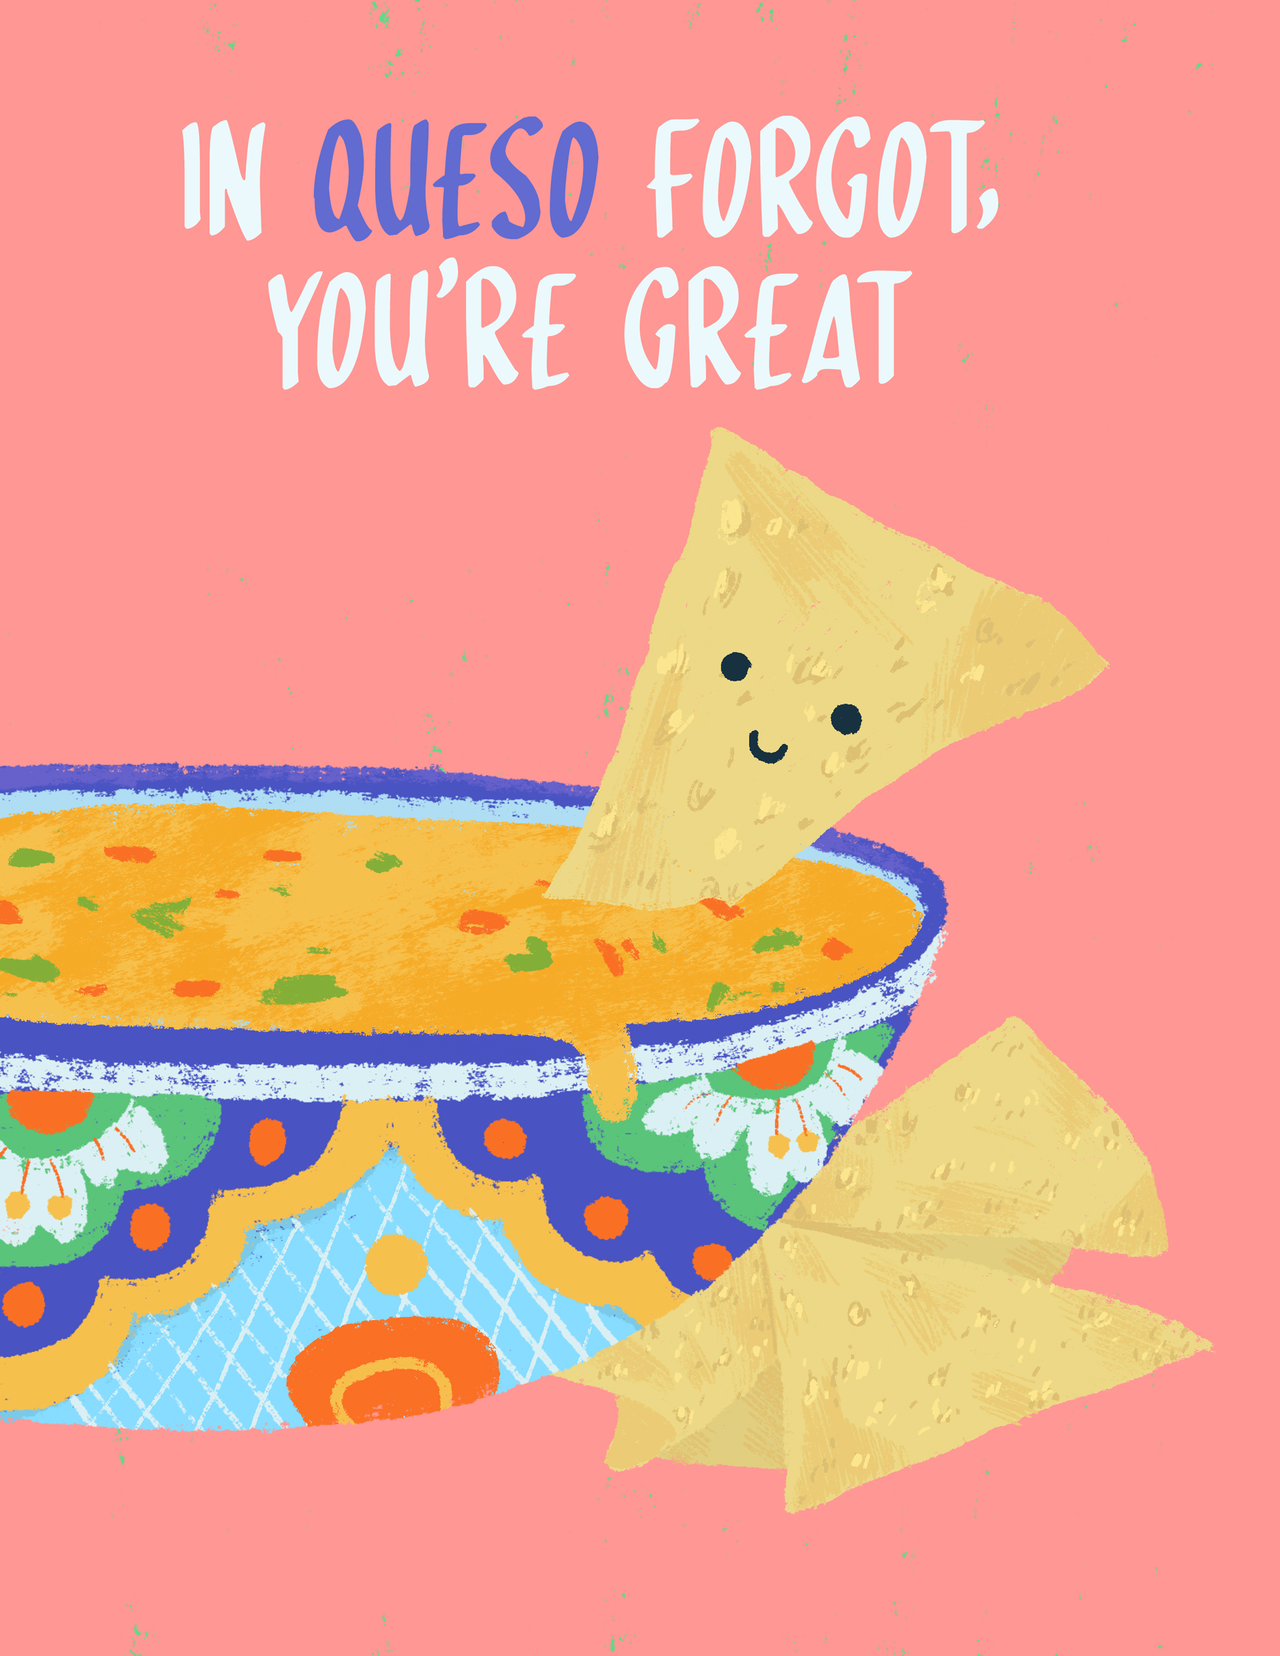 Mexican food puns